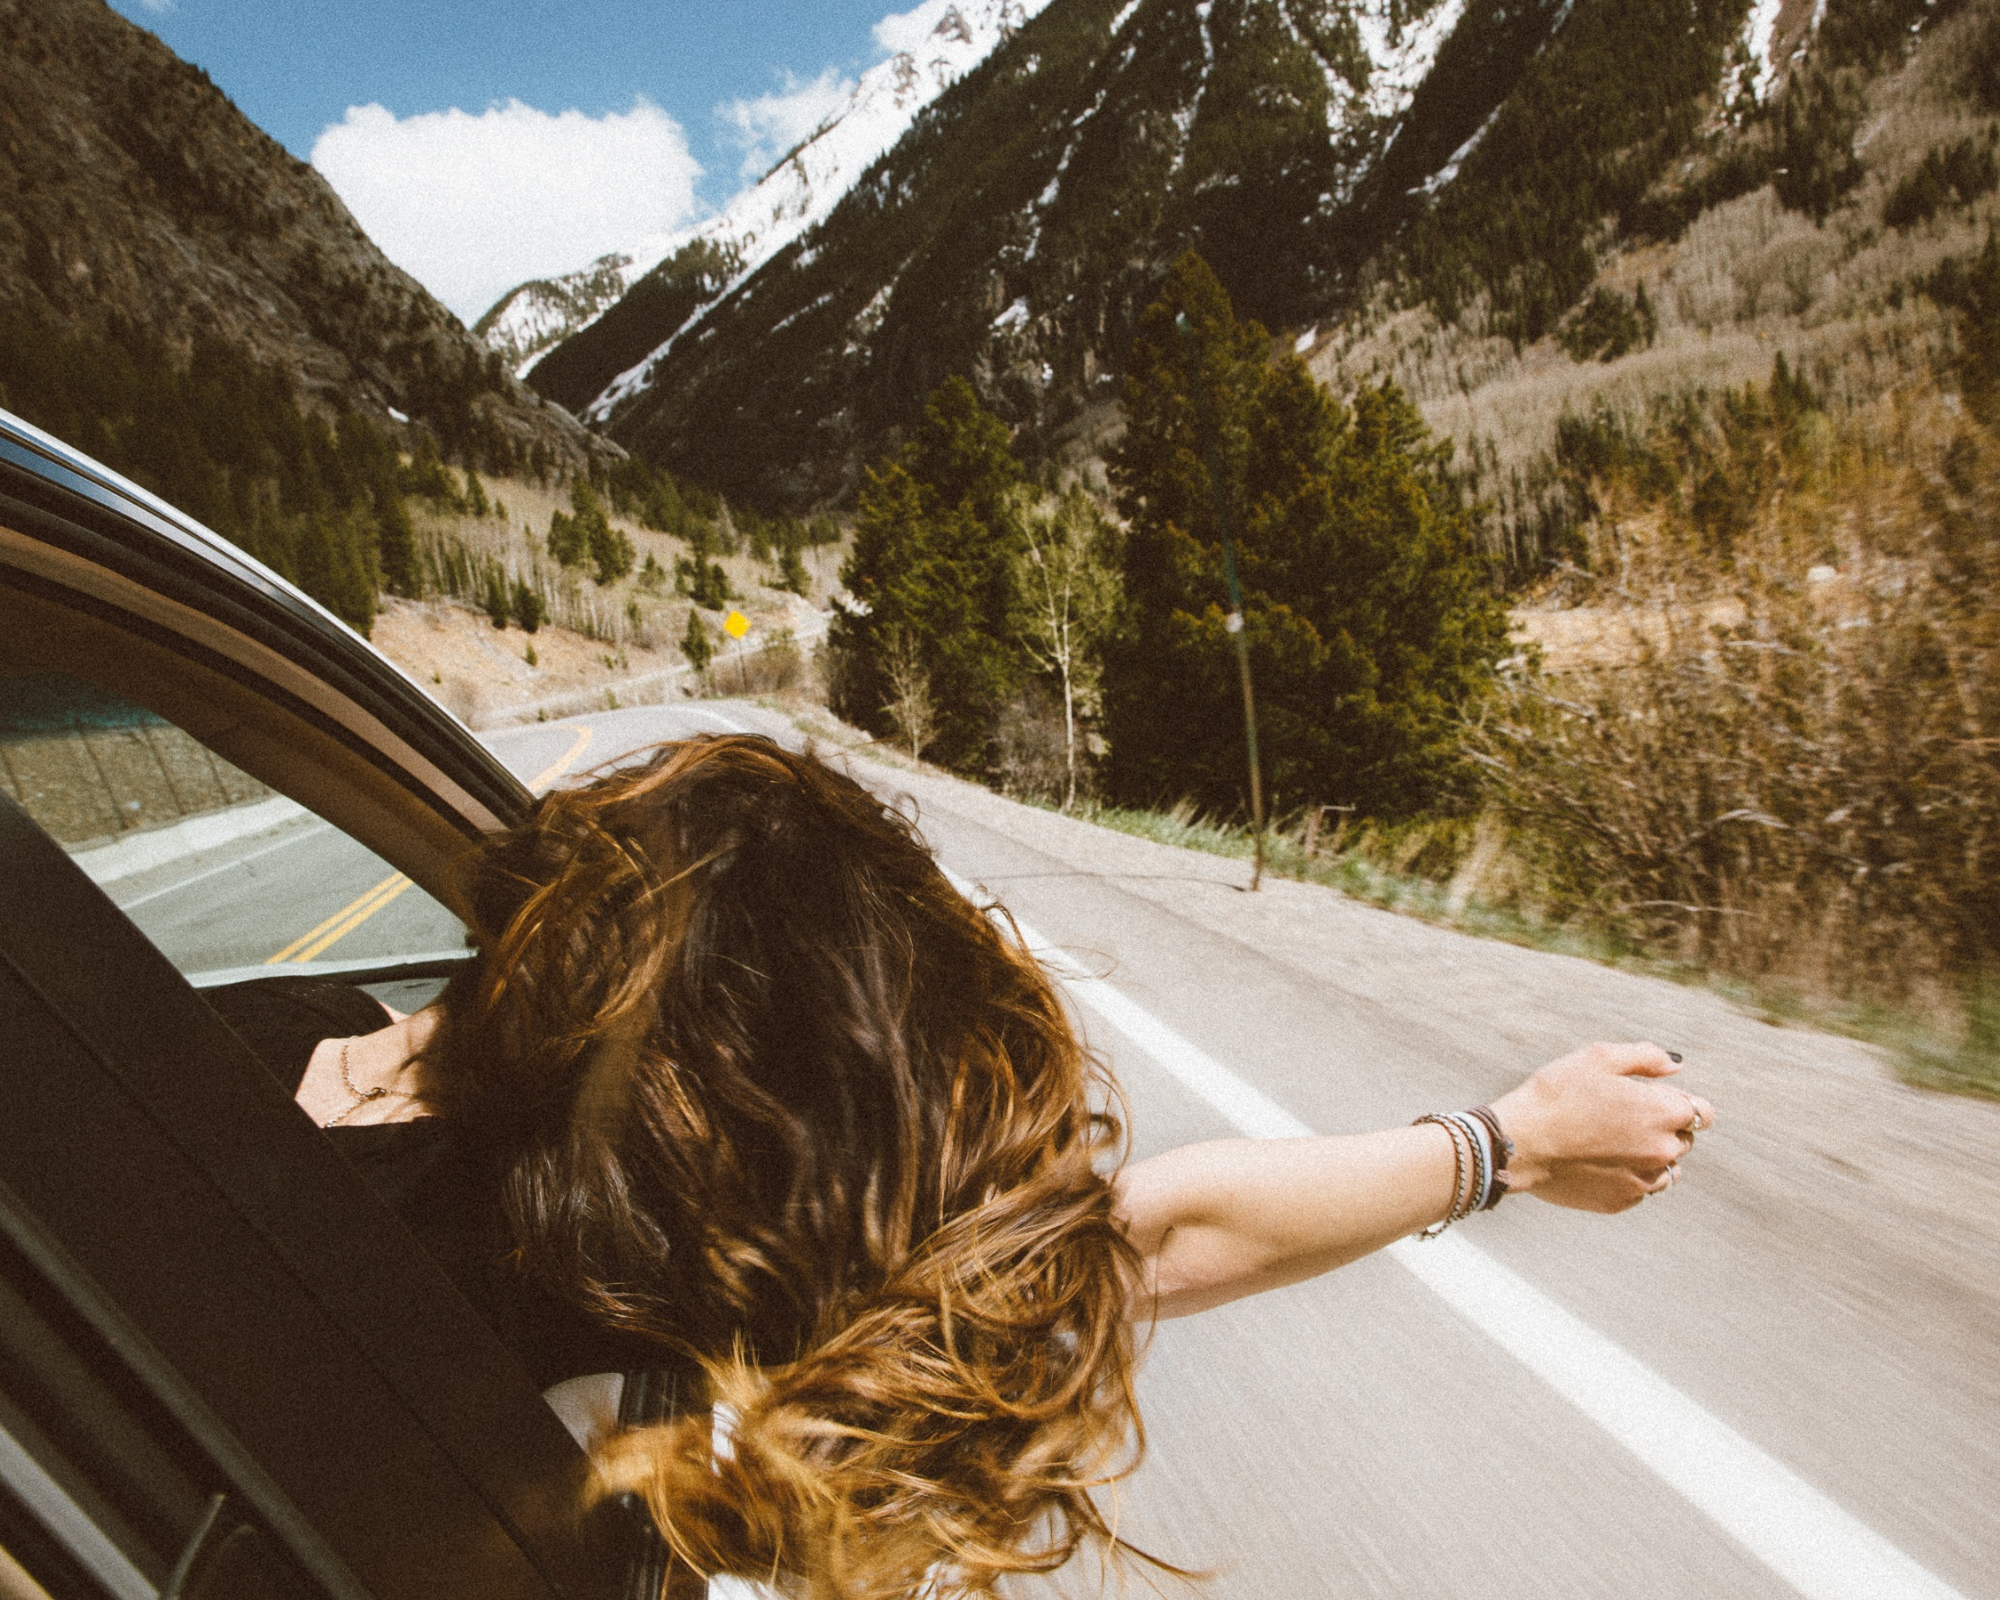 Woman with long hari sticking her head out of a car window during a drive on a road- get paid to travel as a sleep consultant